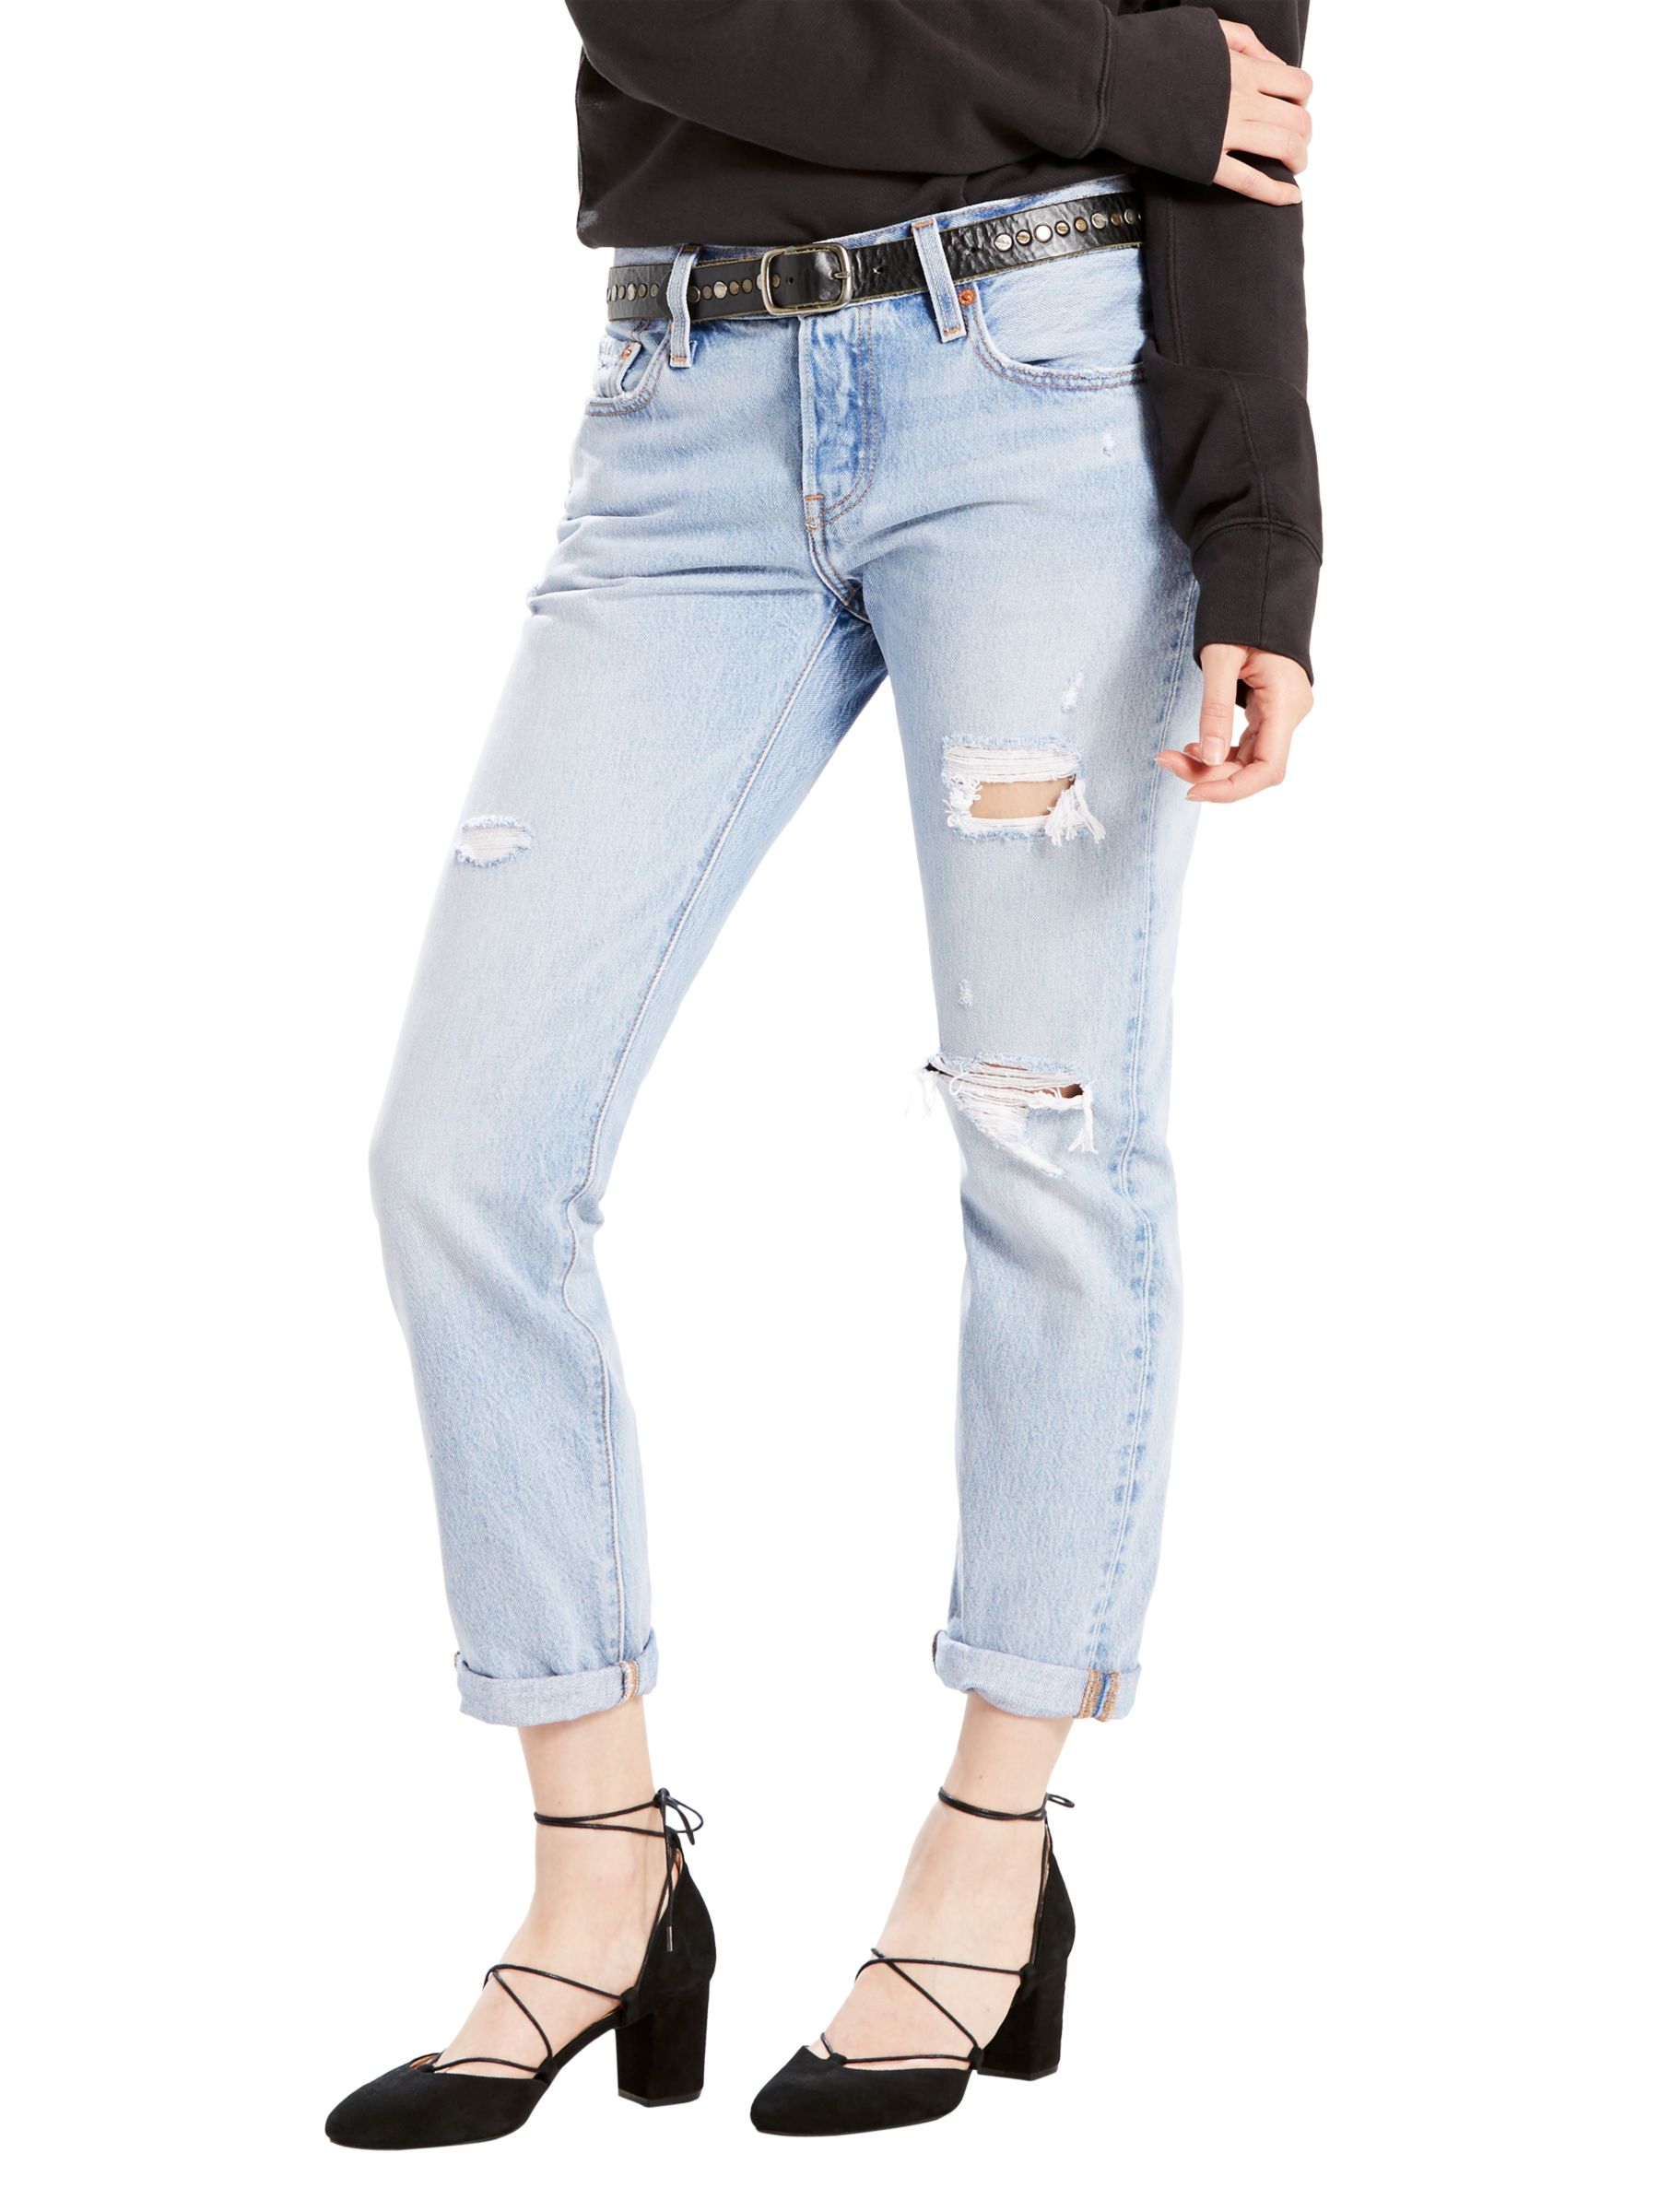 Levi's 501 High Rise Tapered Jeans, So 